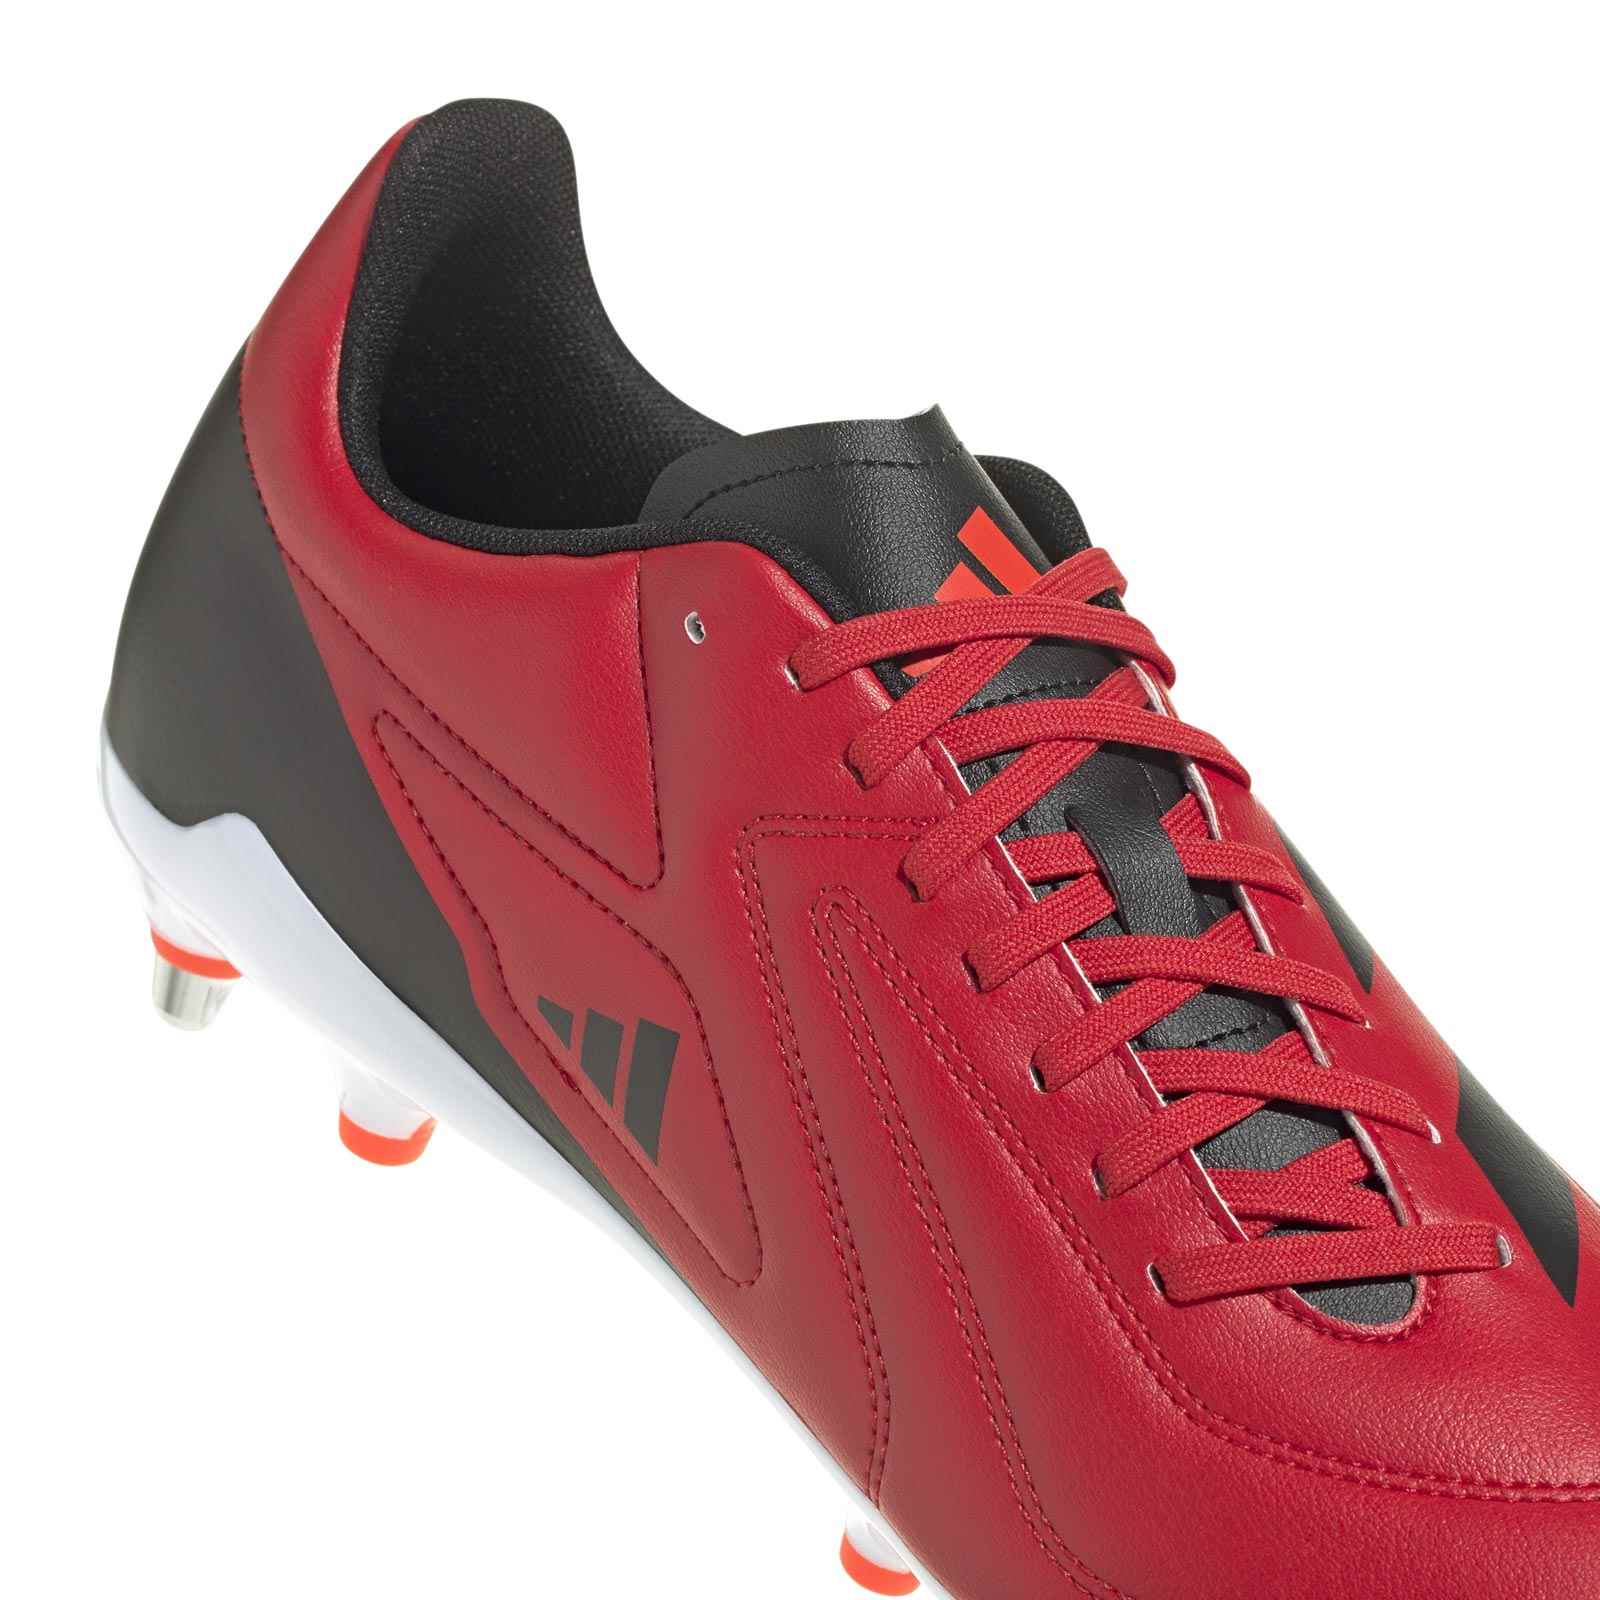 adidas RS15 Pro Soft Ground Rugby Boots